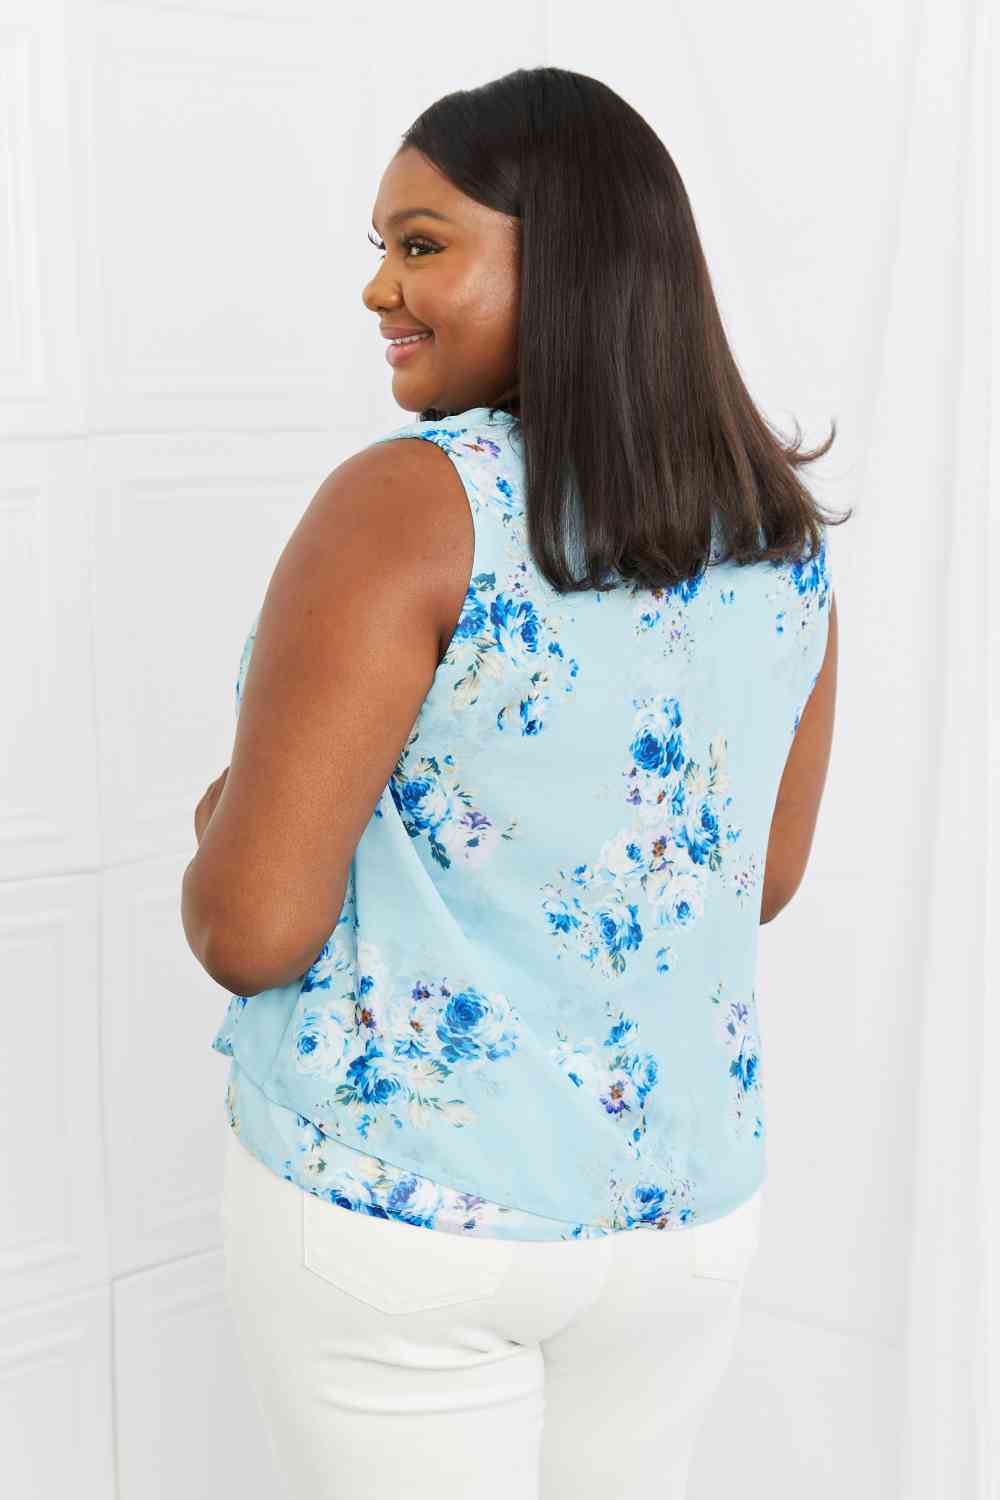 Sew In Love Off To Brunch Full Size Floral Tank Top Ti Amo I love you